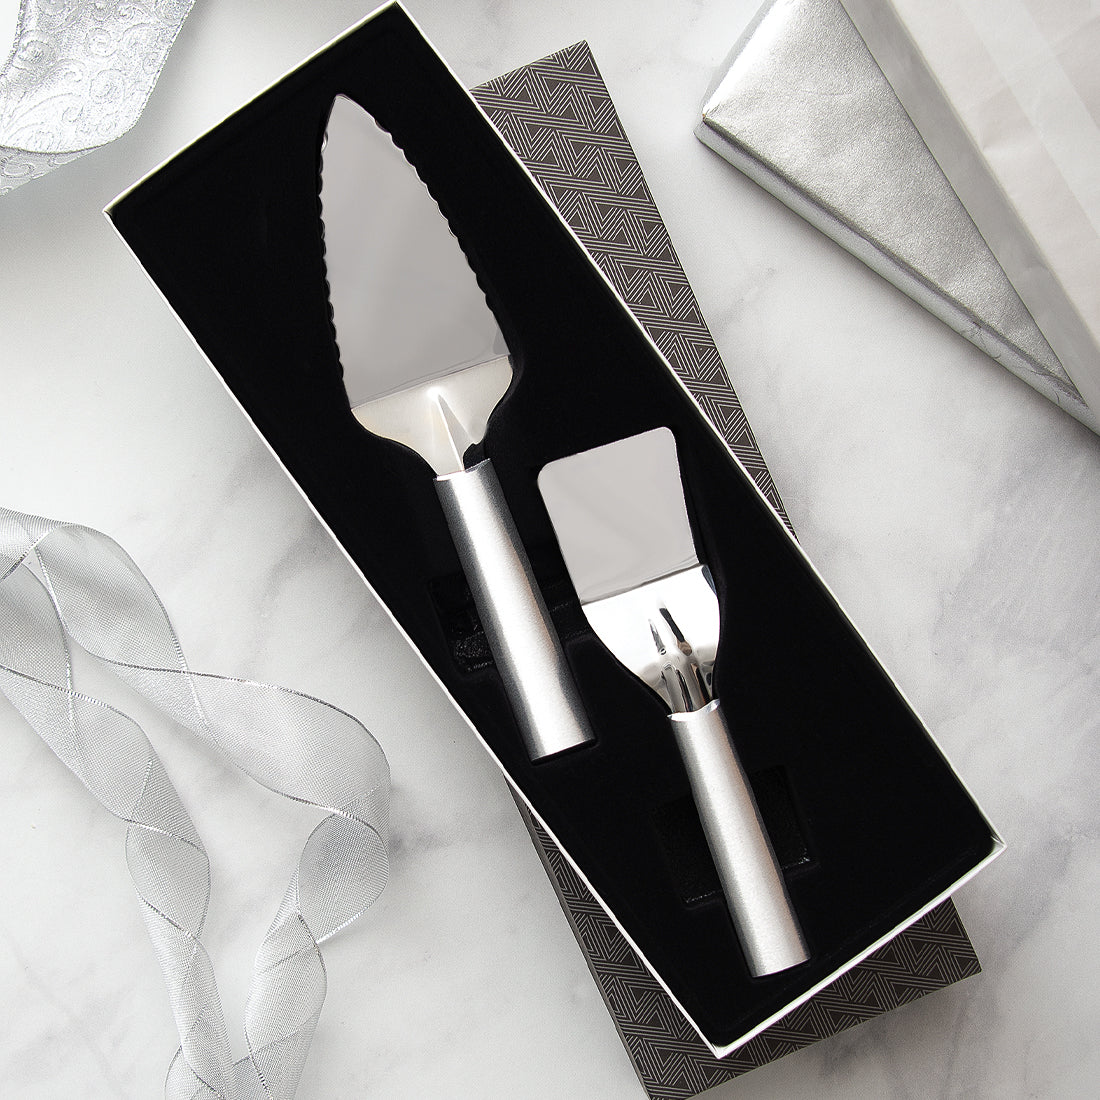 Silver handled Serving Gift Set on a marbled countertop.